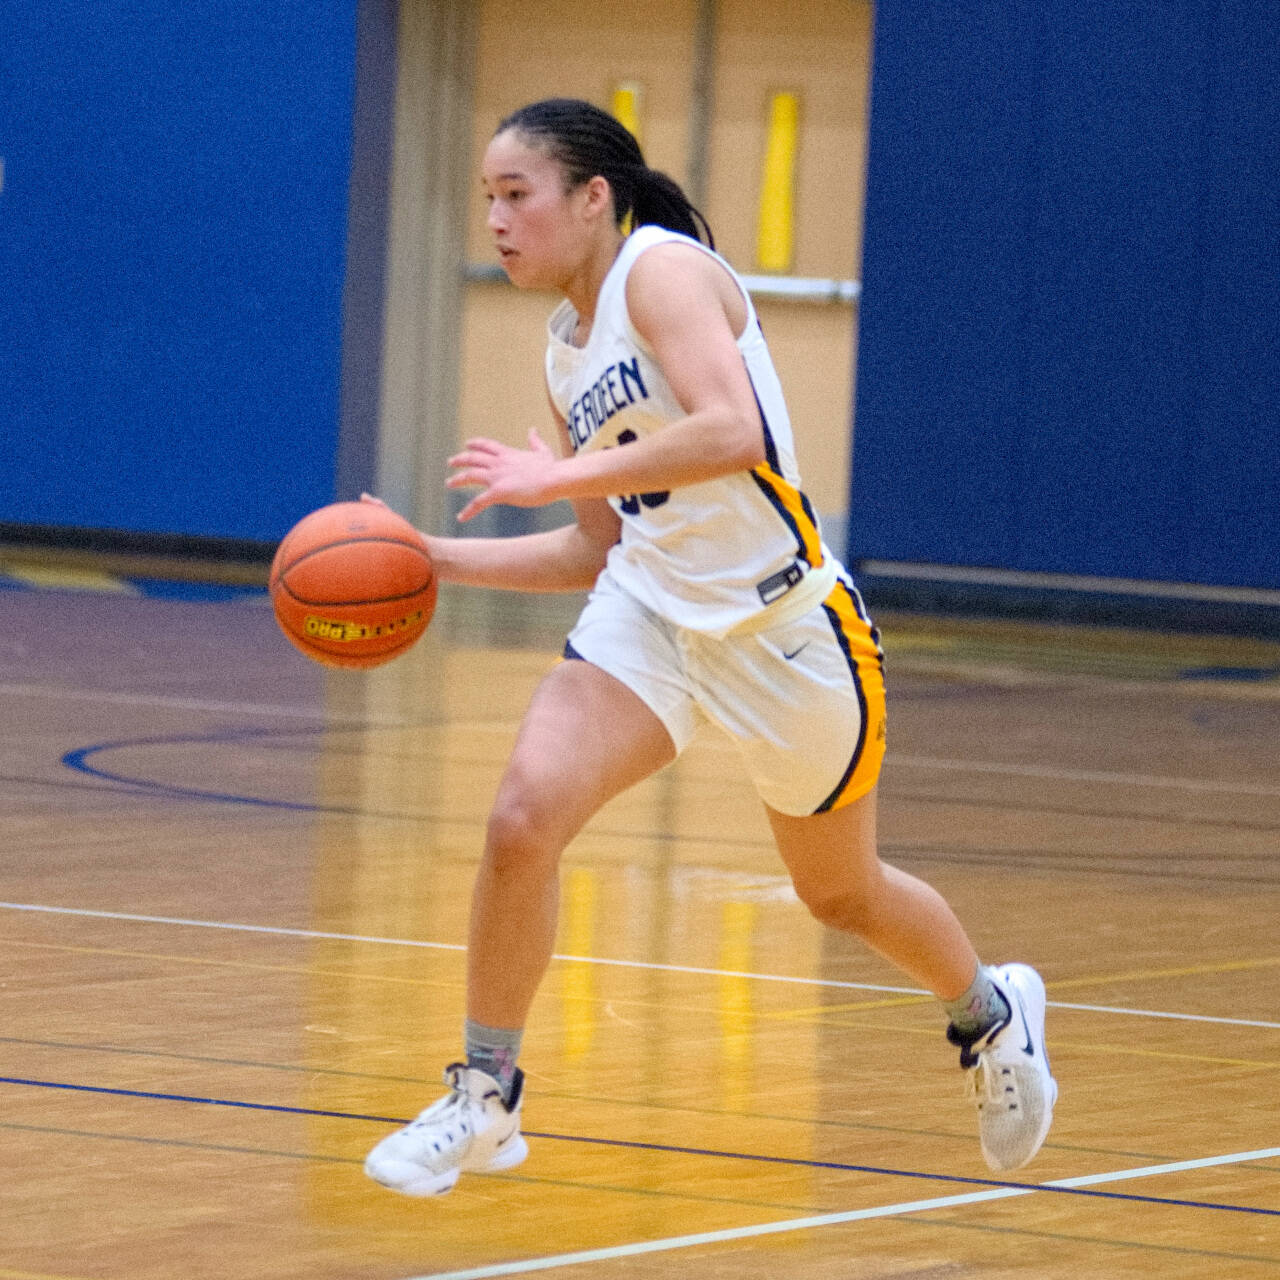 DAILY WORLD FILE PHOTO Aberdeen junior guard Maddie Gore was named to the 2A Evergreen Conference’s First Team after averaging over 12 points per game for the Bobcats this season.